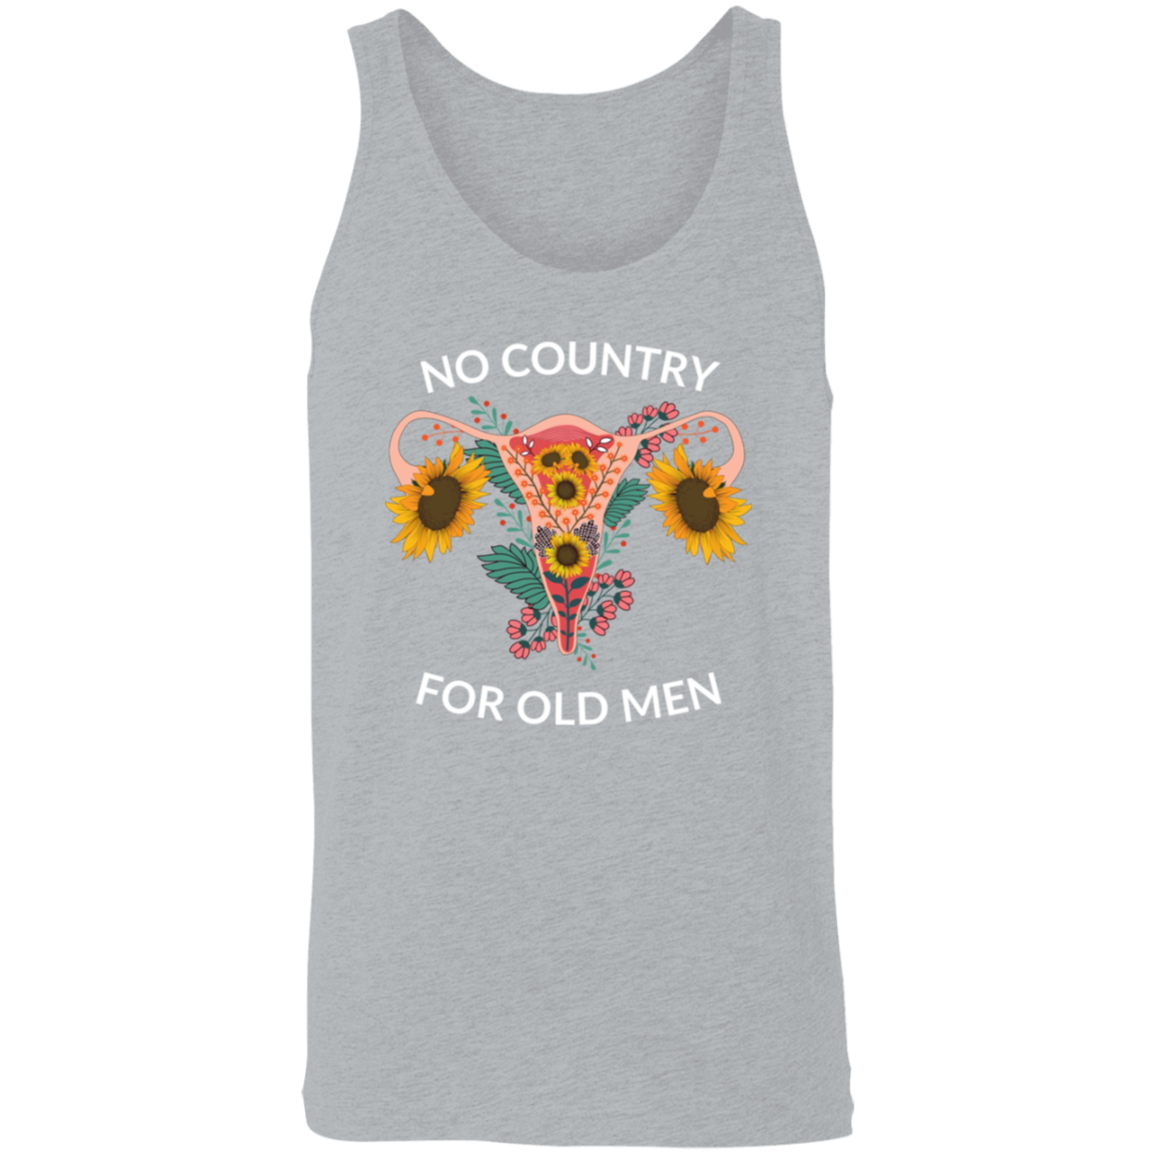 No Country For Old Men (Sunflower) Tank - Unisex